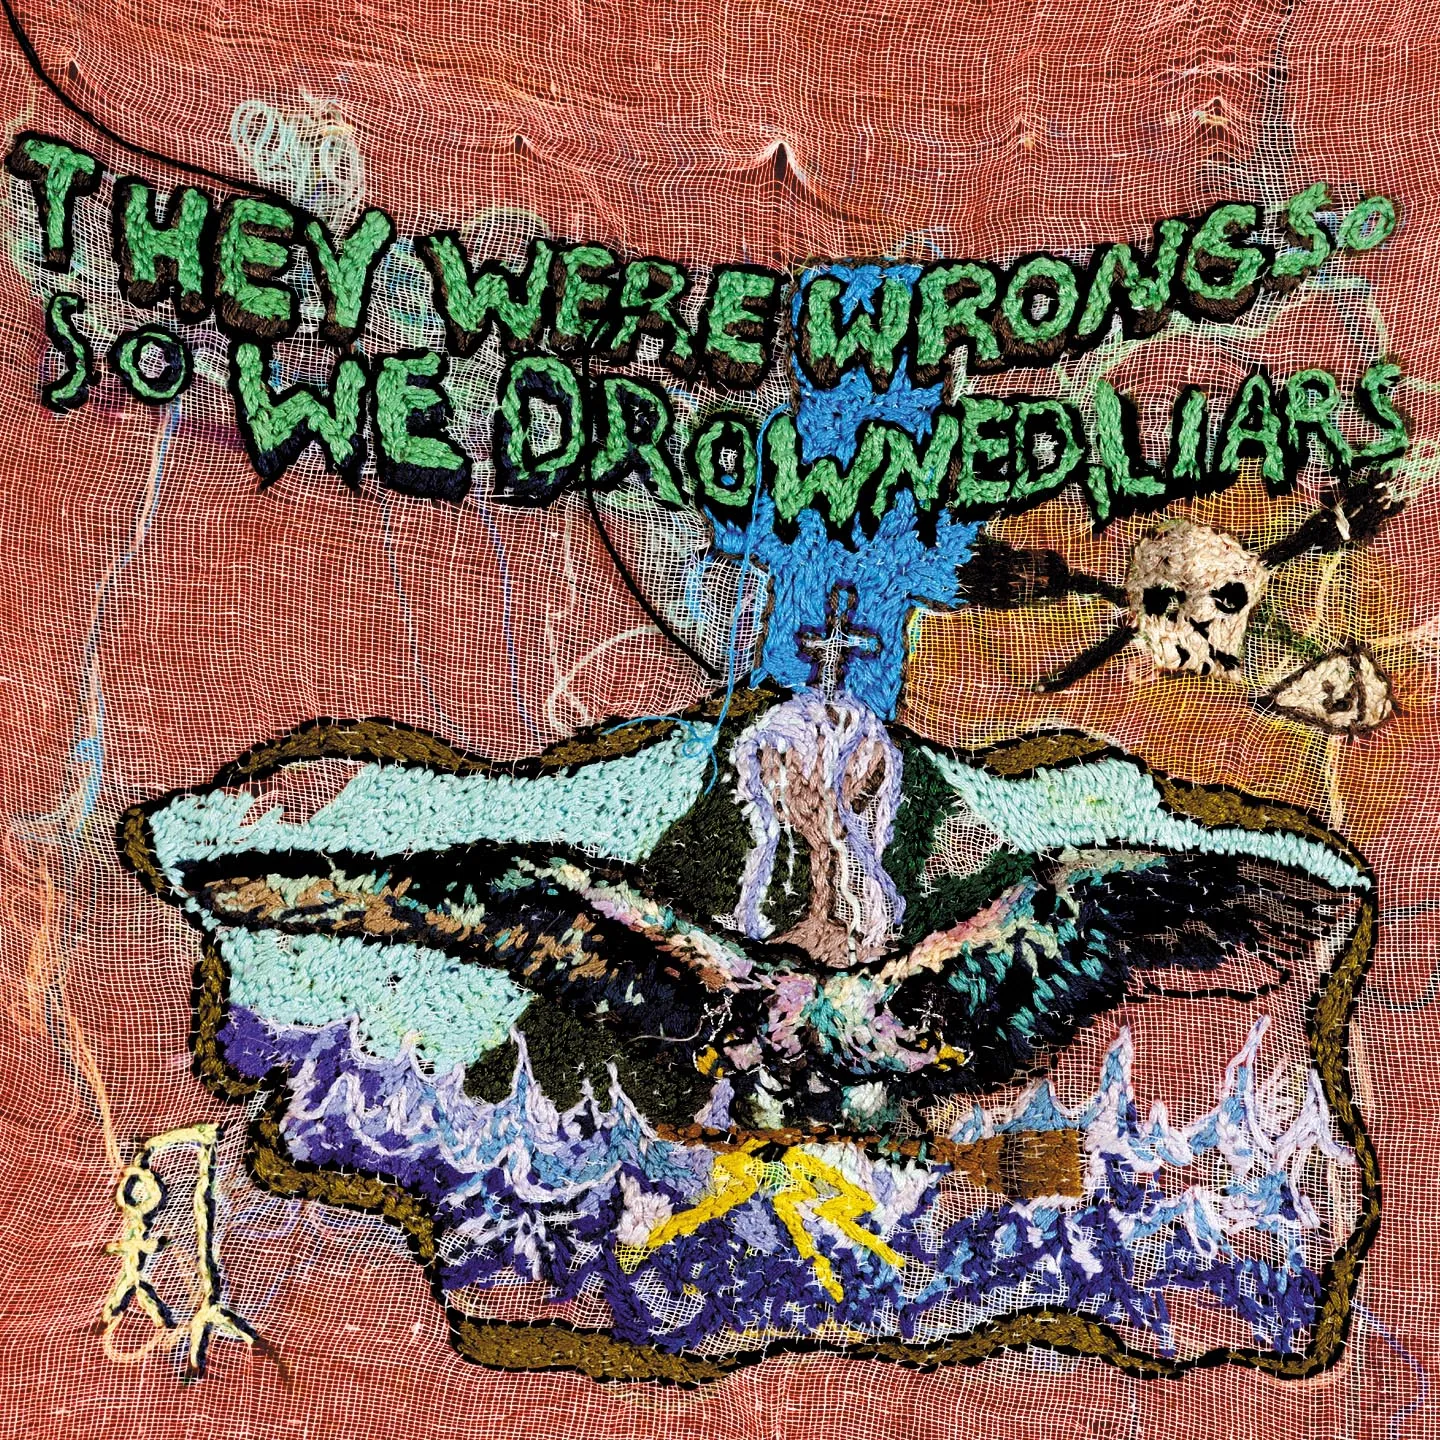 <strong>Liars - They Were Wrong, So We Drowned</strong> (Vinyl LP - brown)